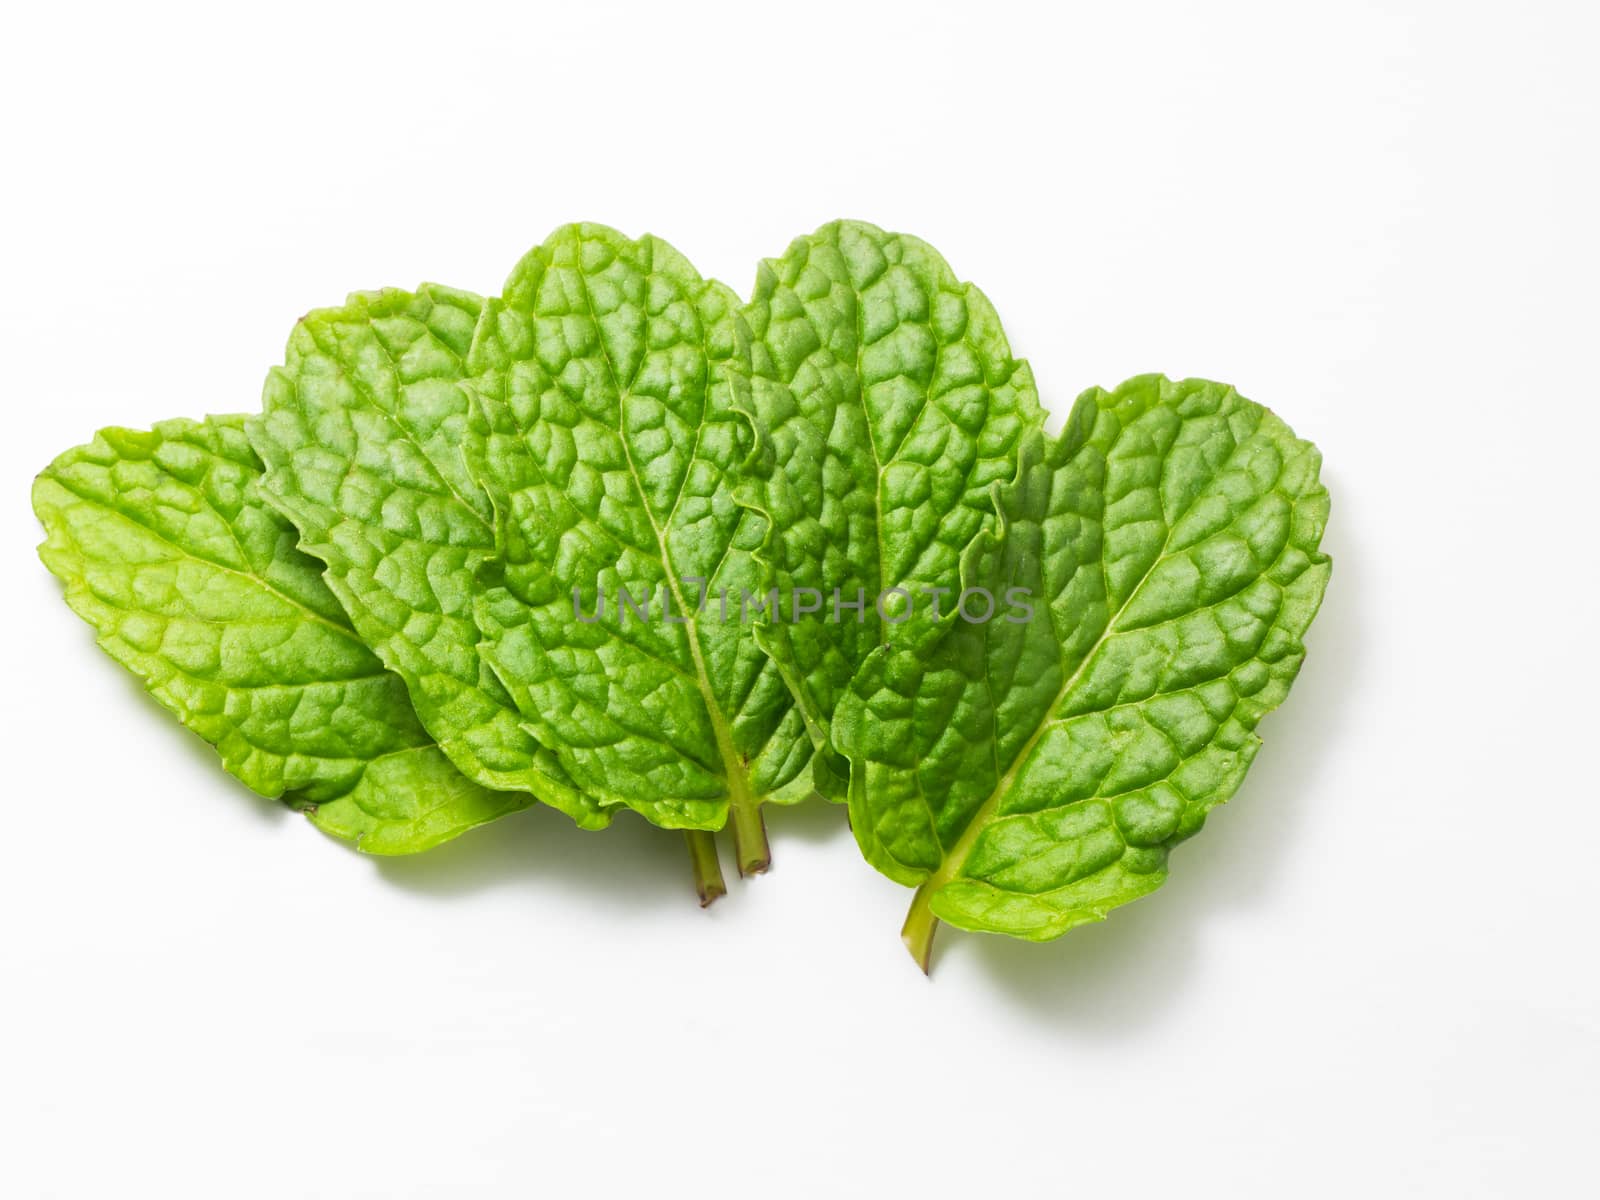 close up fresh mint leaves on white background by APTX4869